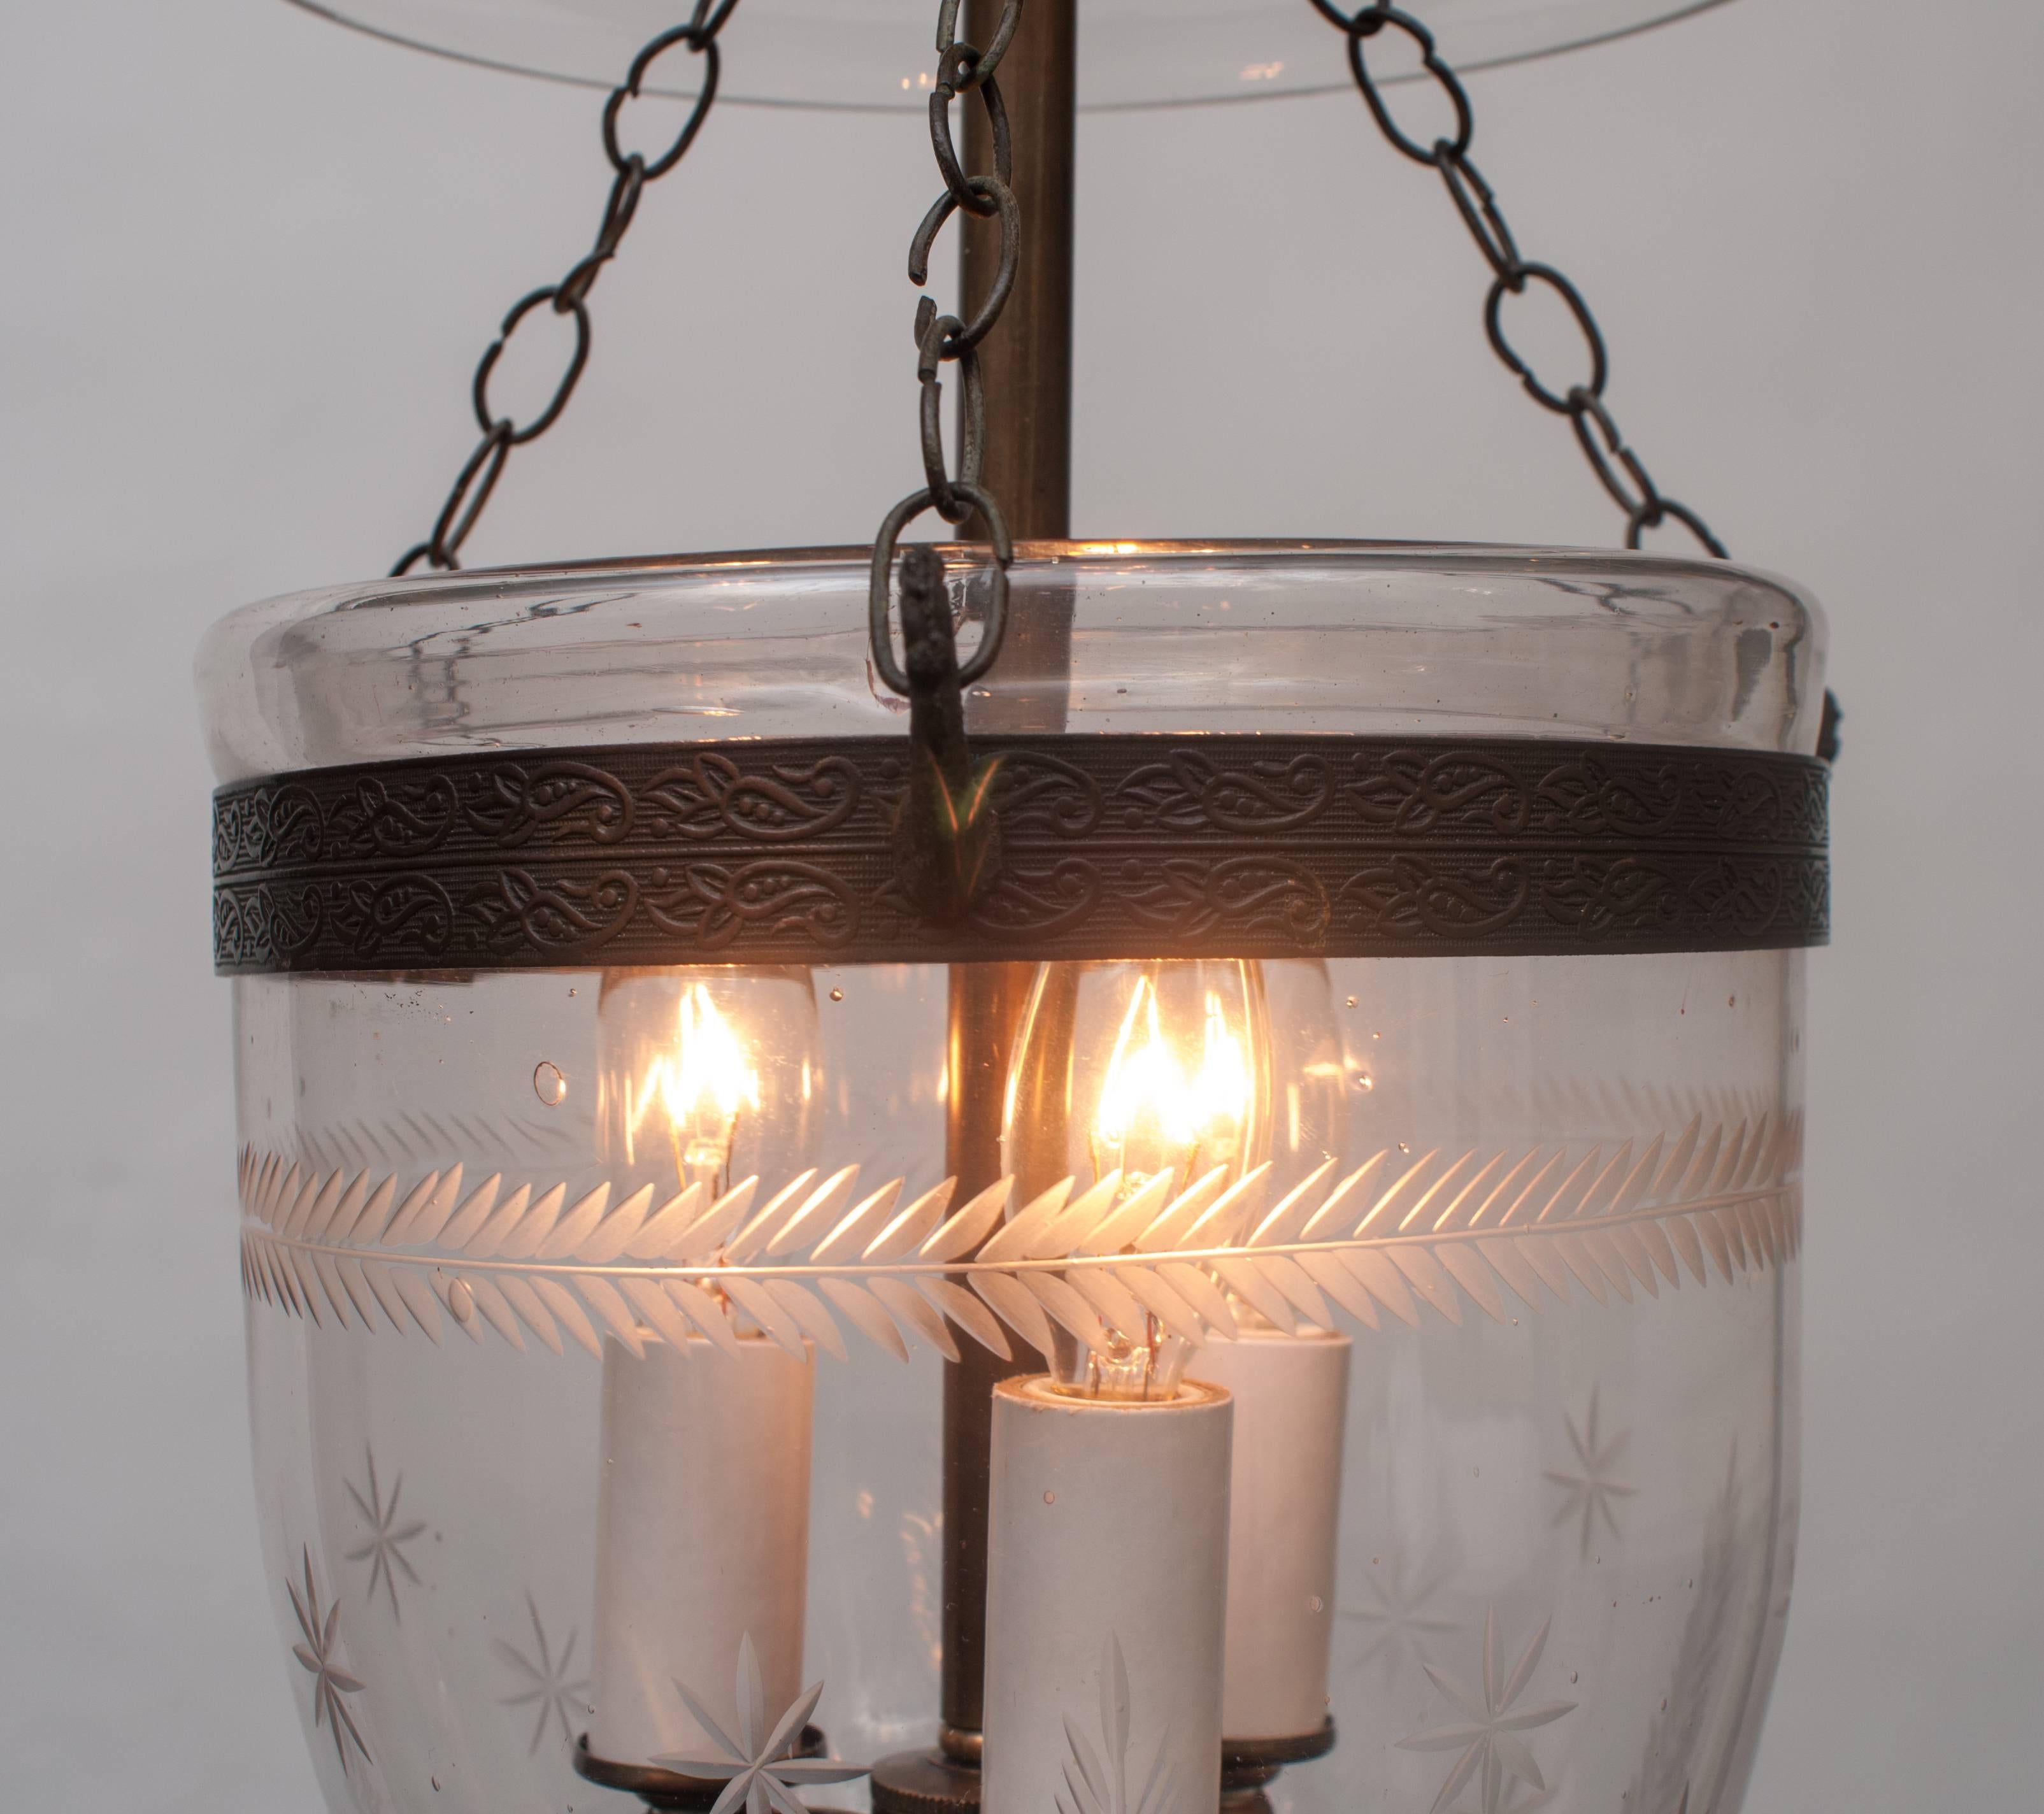 Hand etched - three lights - original brass - blown glass pontil (finial) - height can be adjusted. Ceiling cap, chain, and hanging hardware included. Free installation within the Washington metro area, subject to some caveats.